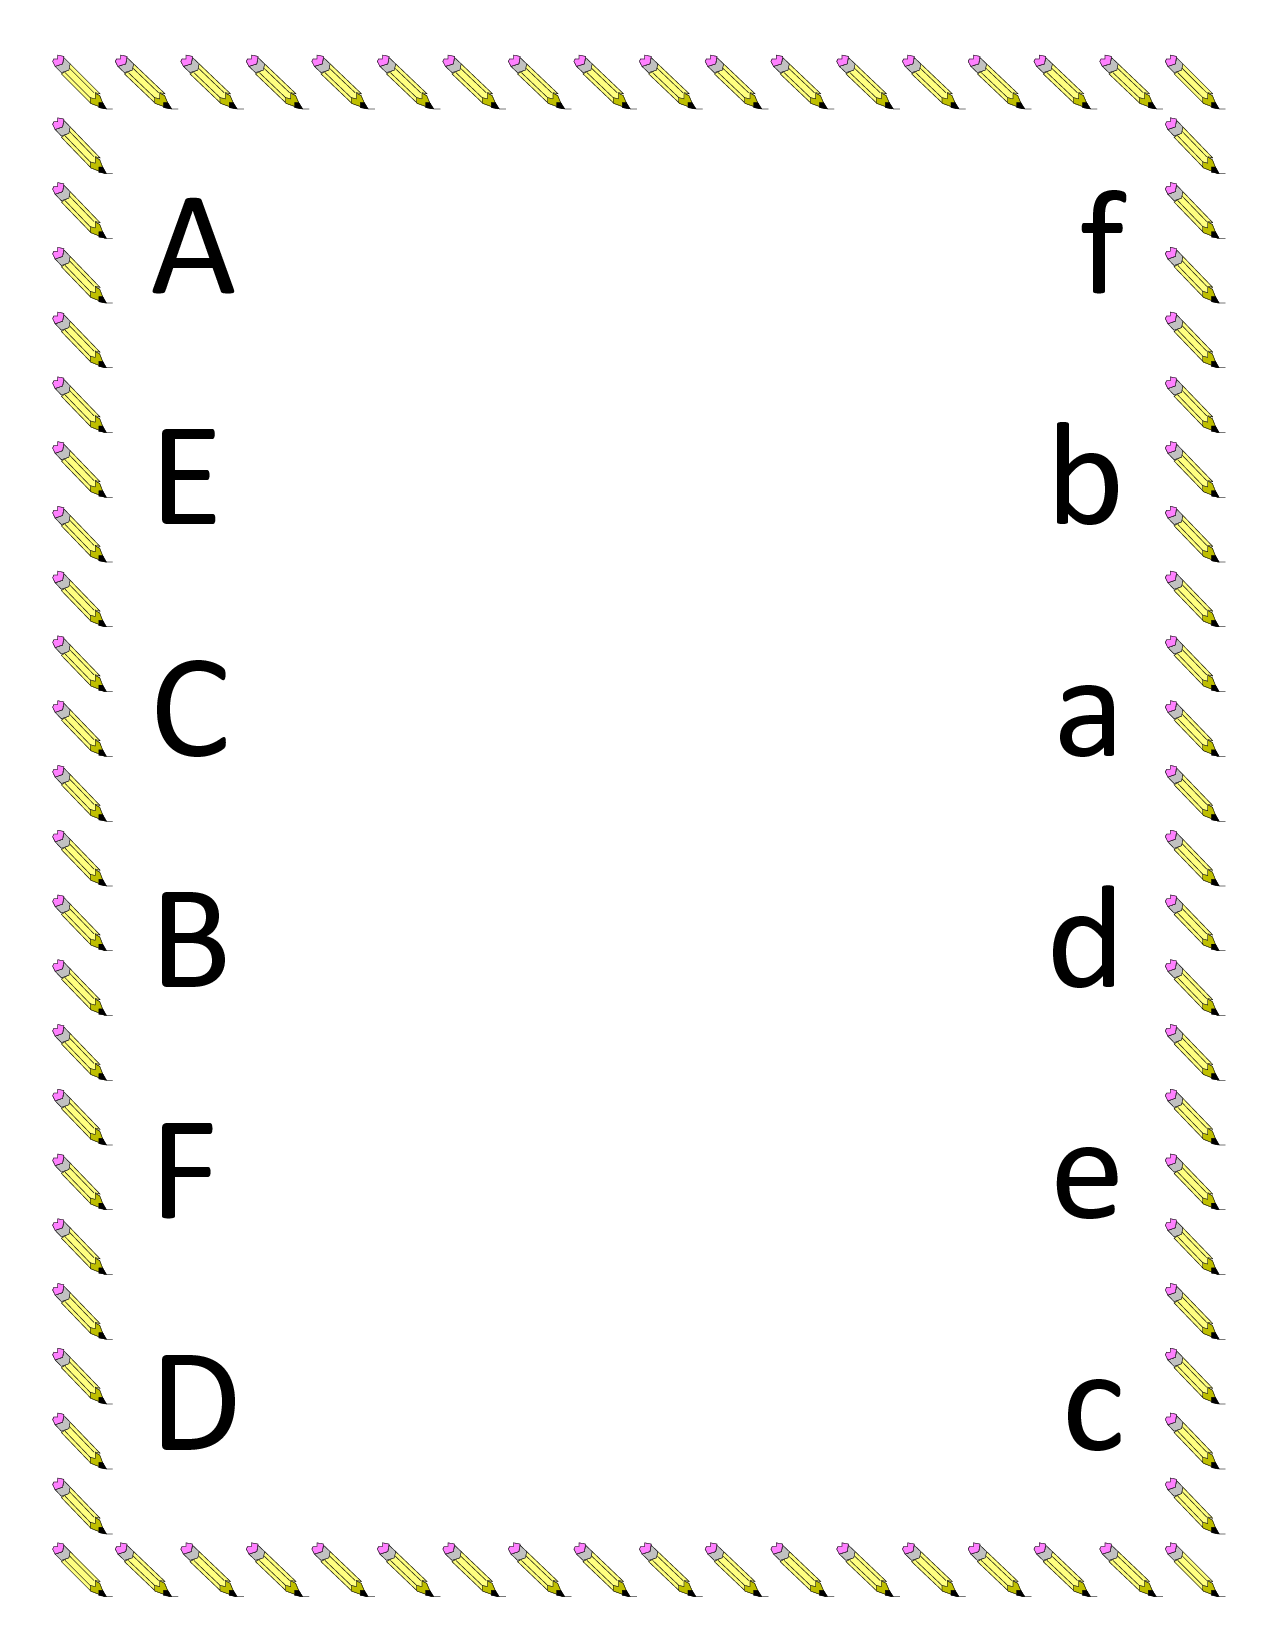 E d page. Worksheets. Буква f задания. A an Worksheets. Worksheets for Kids буквы.